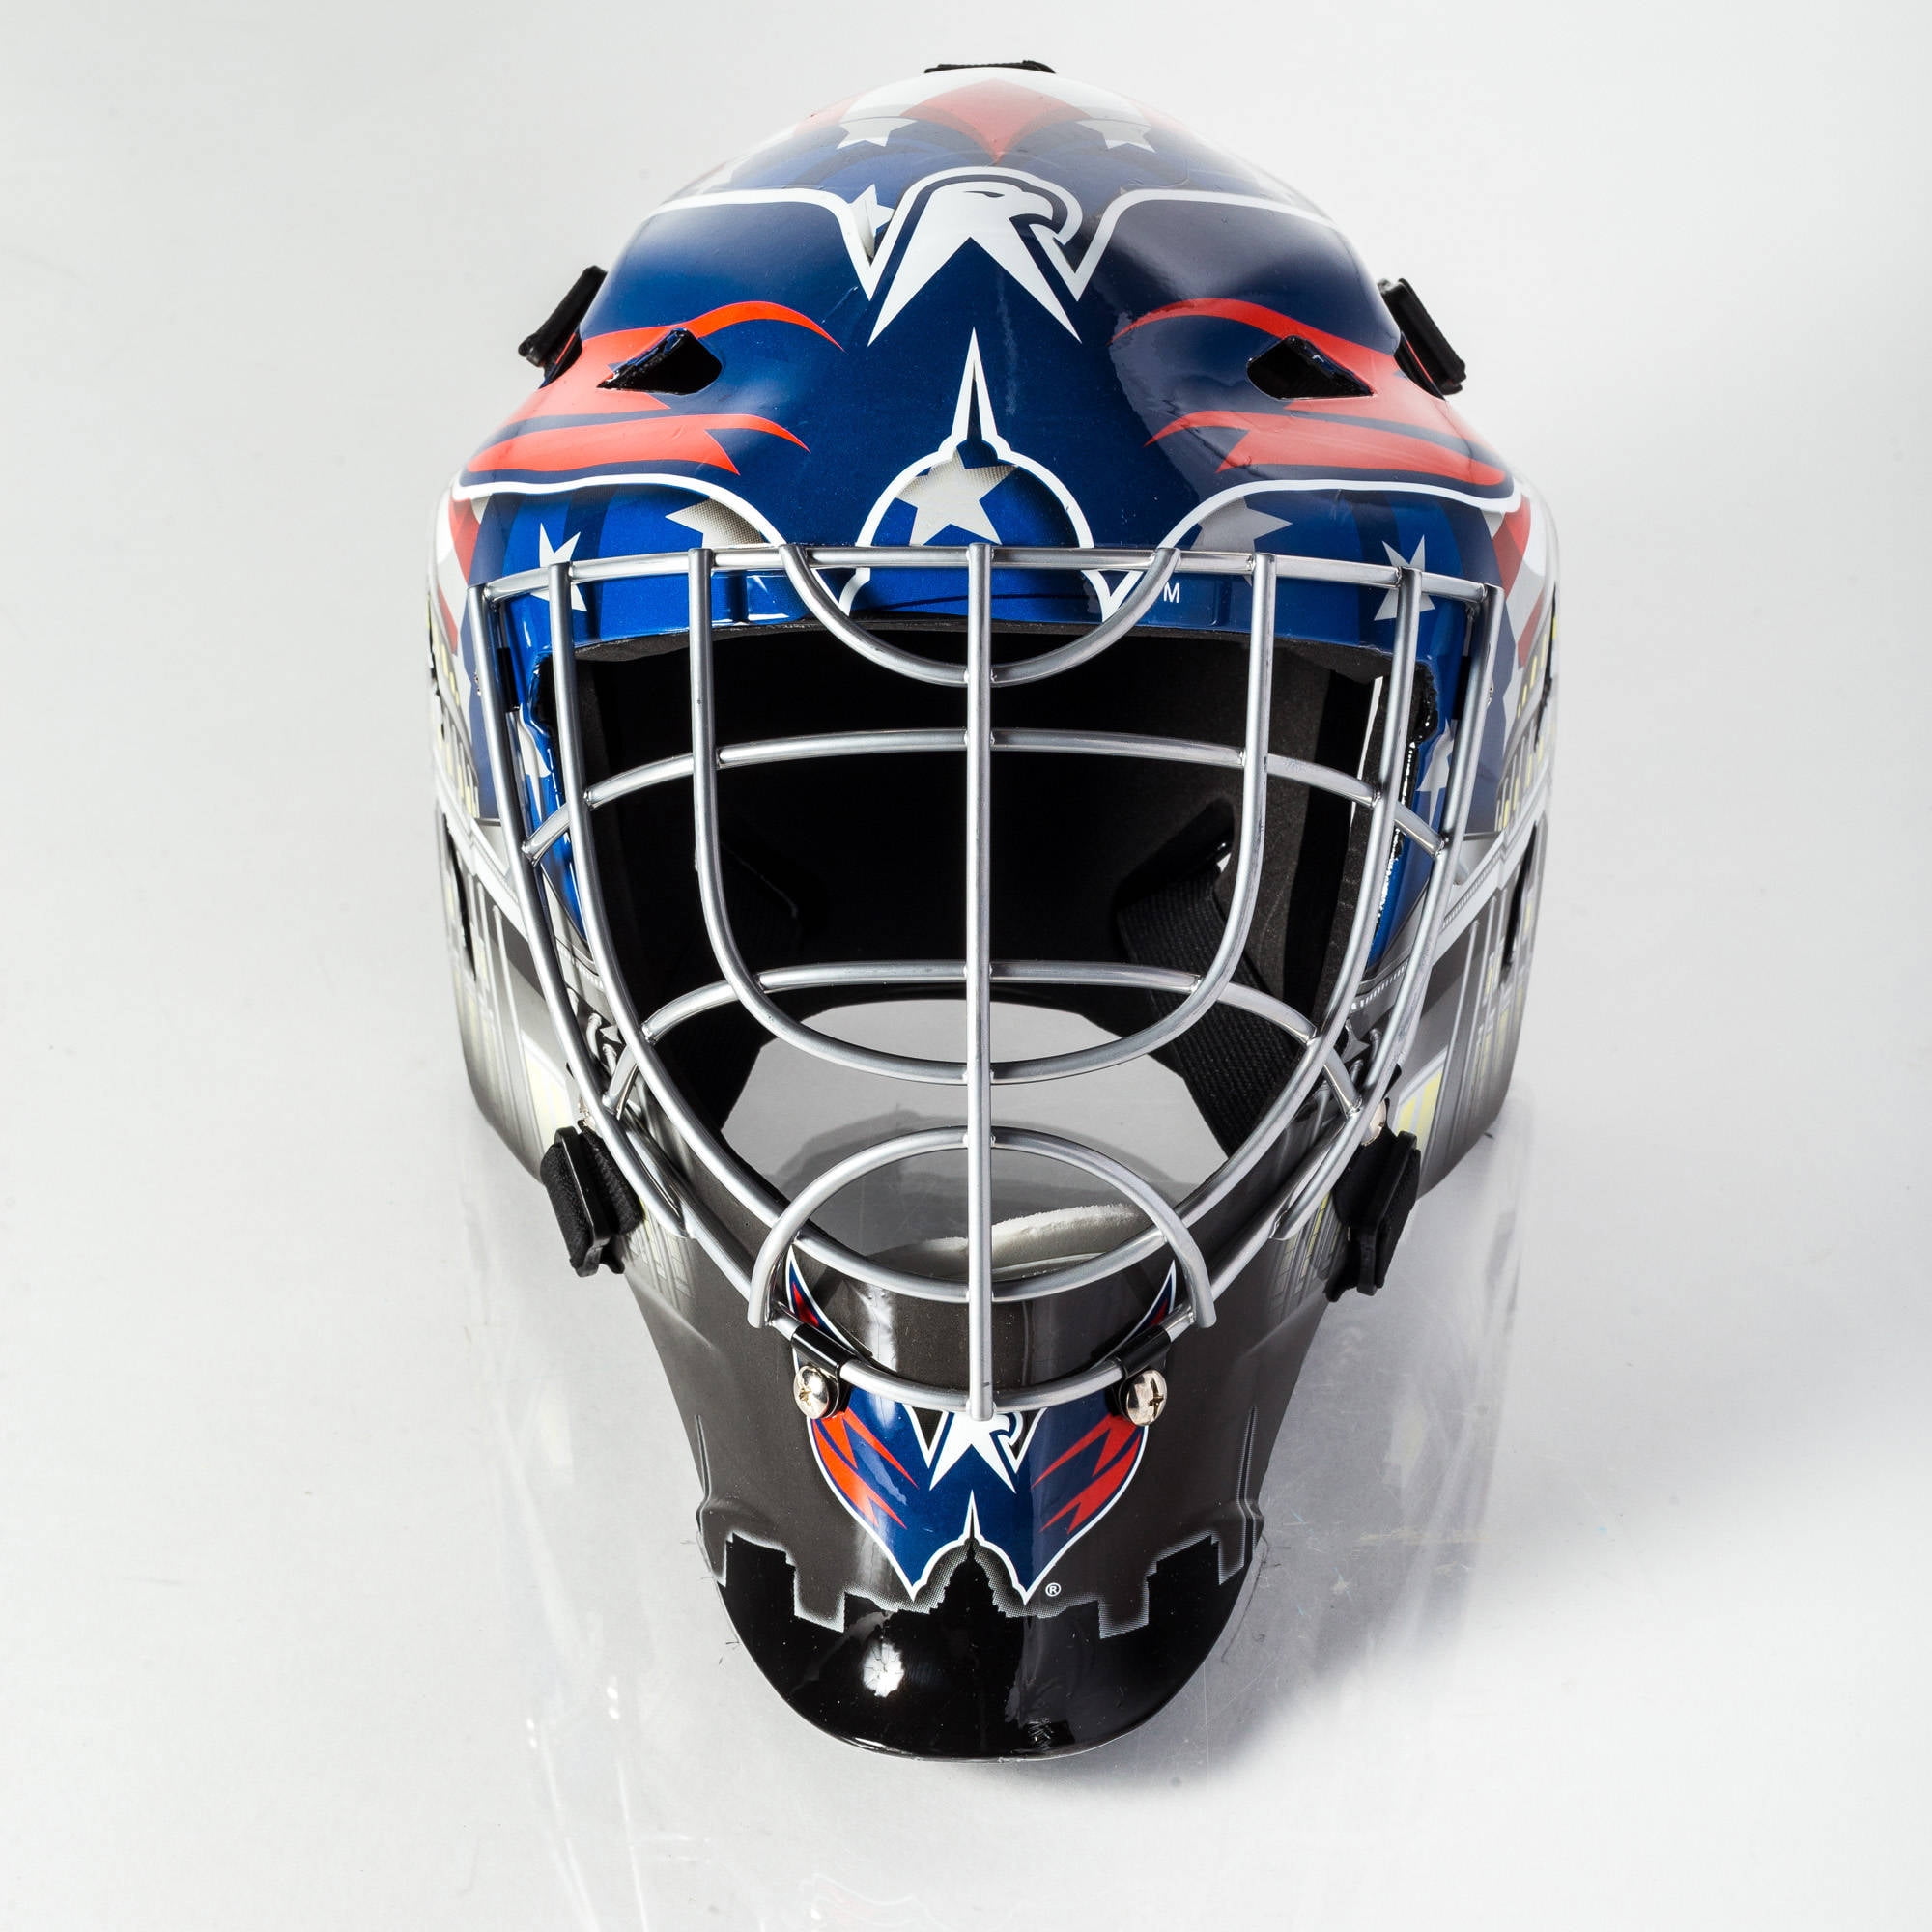 All of the Goalie Masks of the Washington Capitals